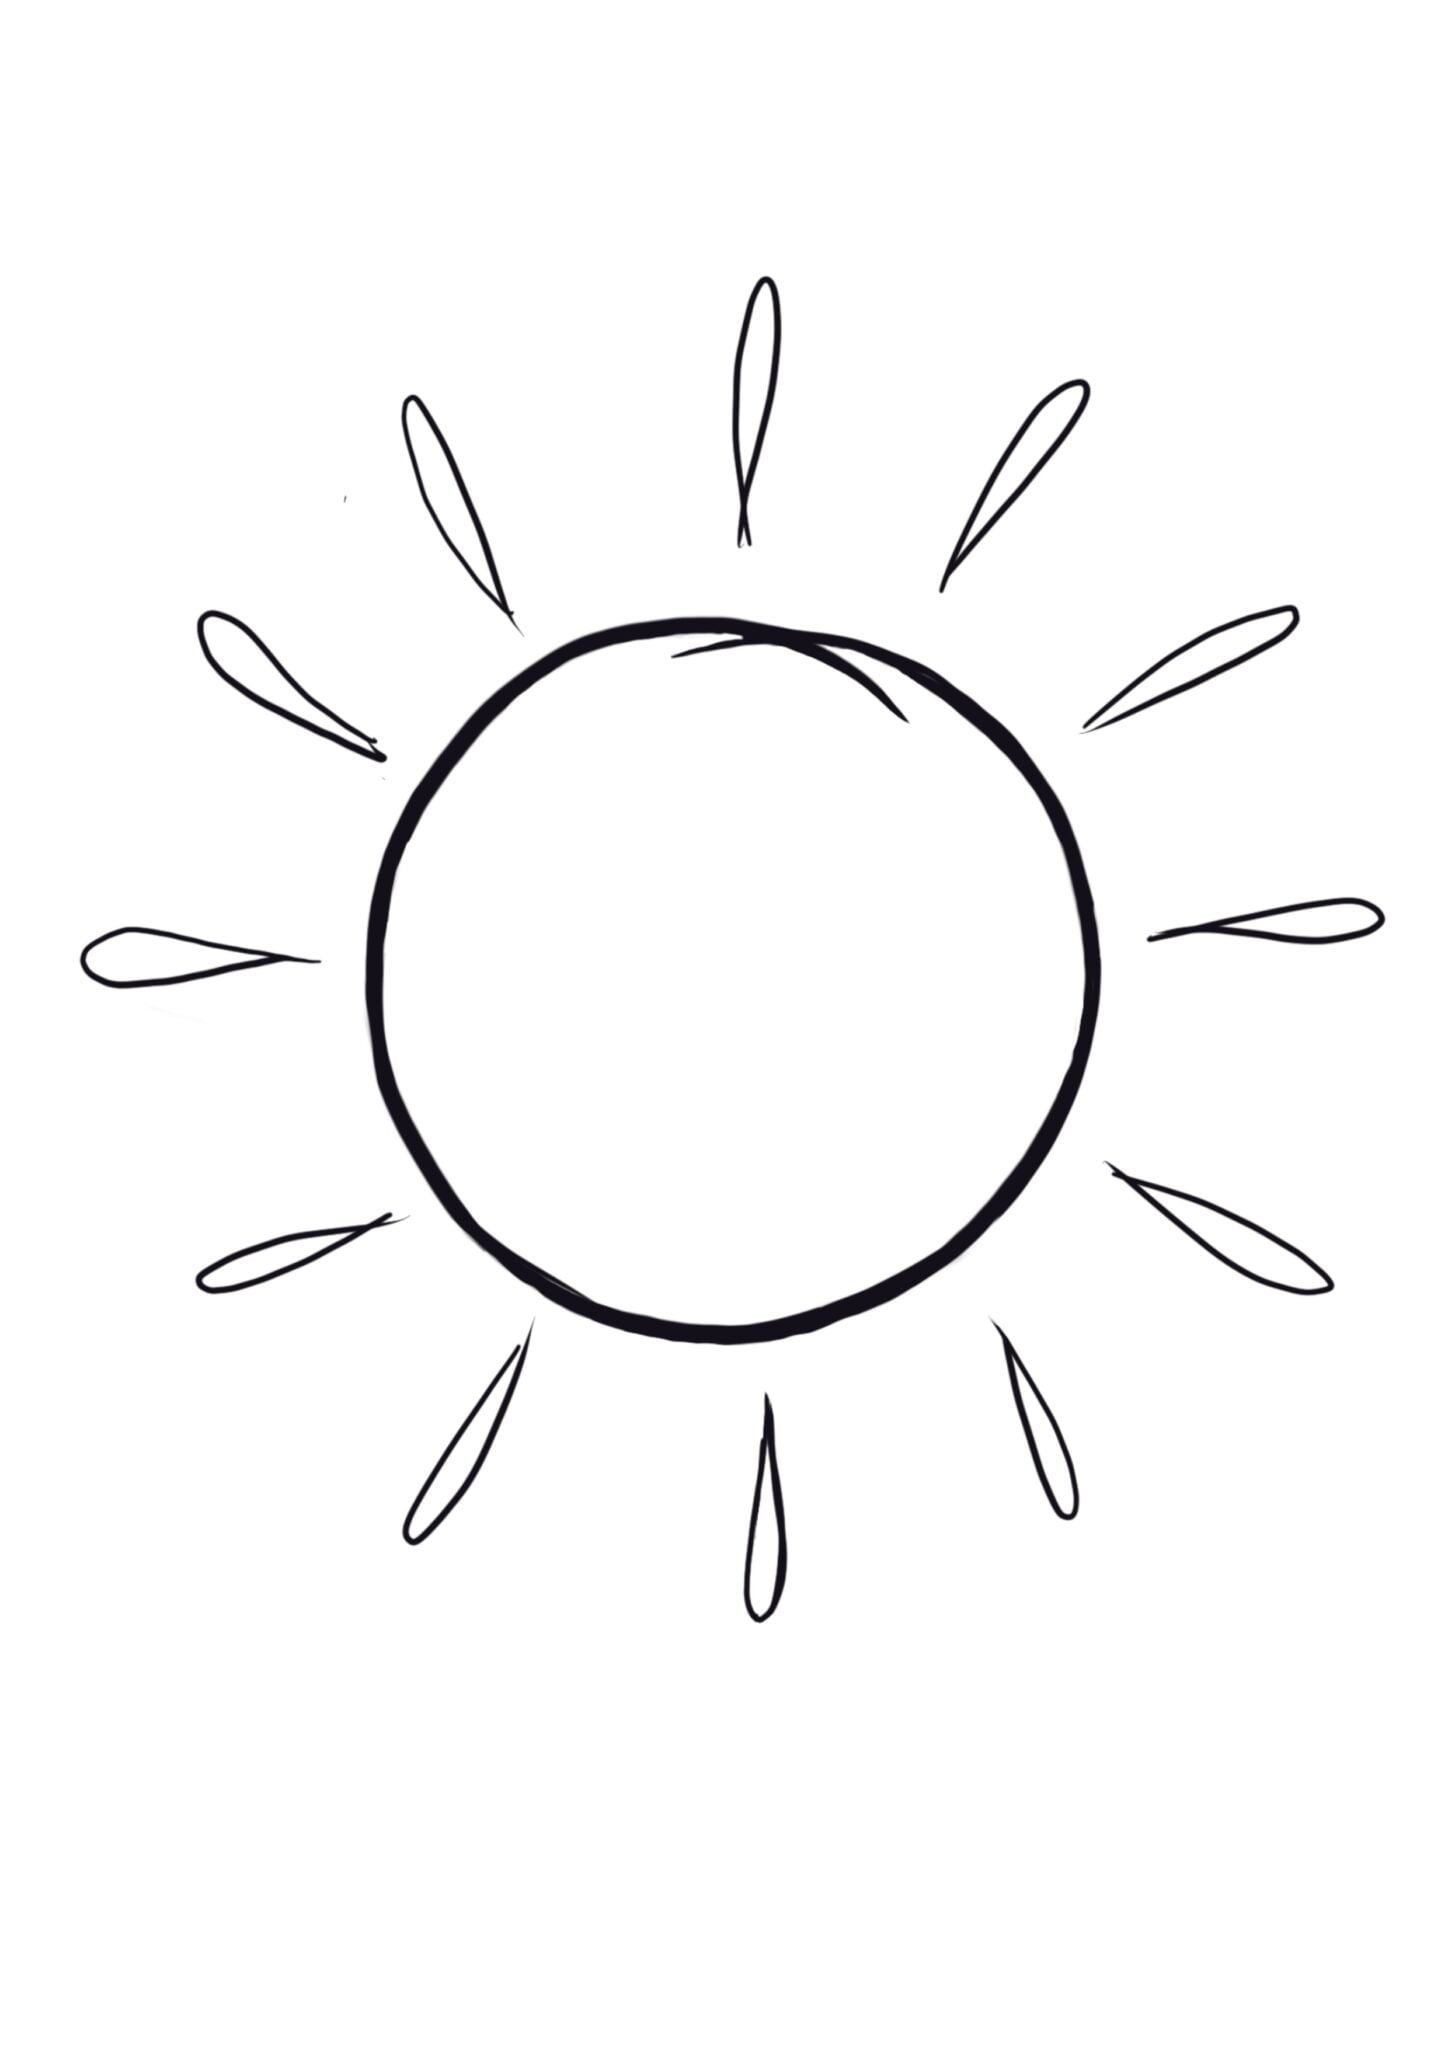 looking-for-a-sun-template-8-free-printable-suns-to-warm-your-creative